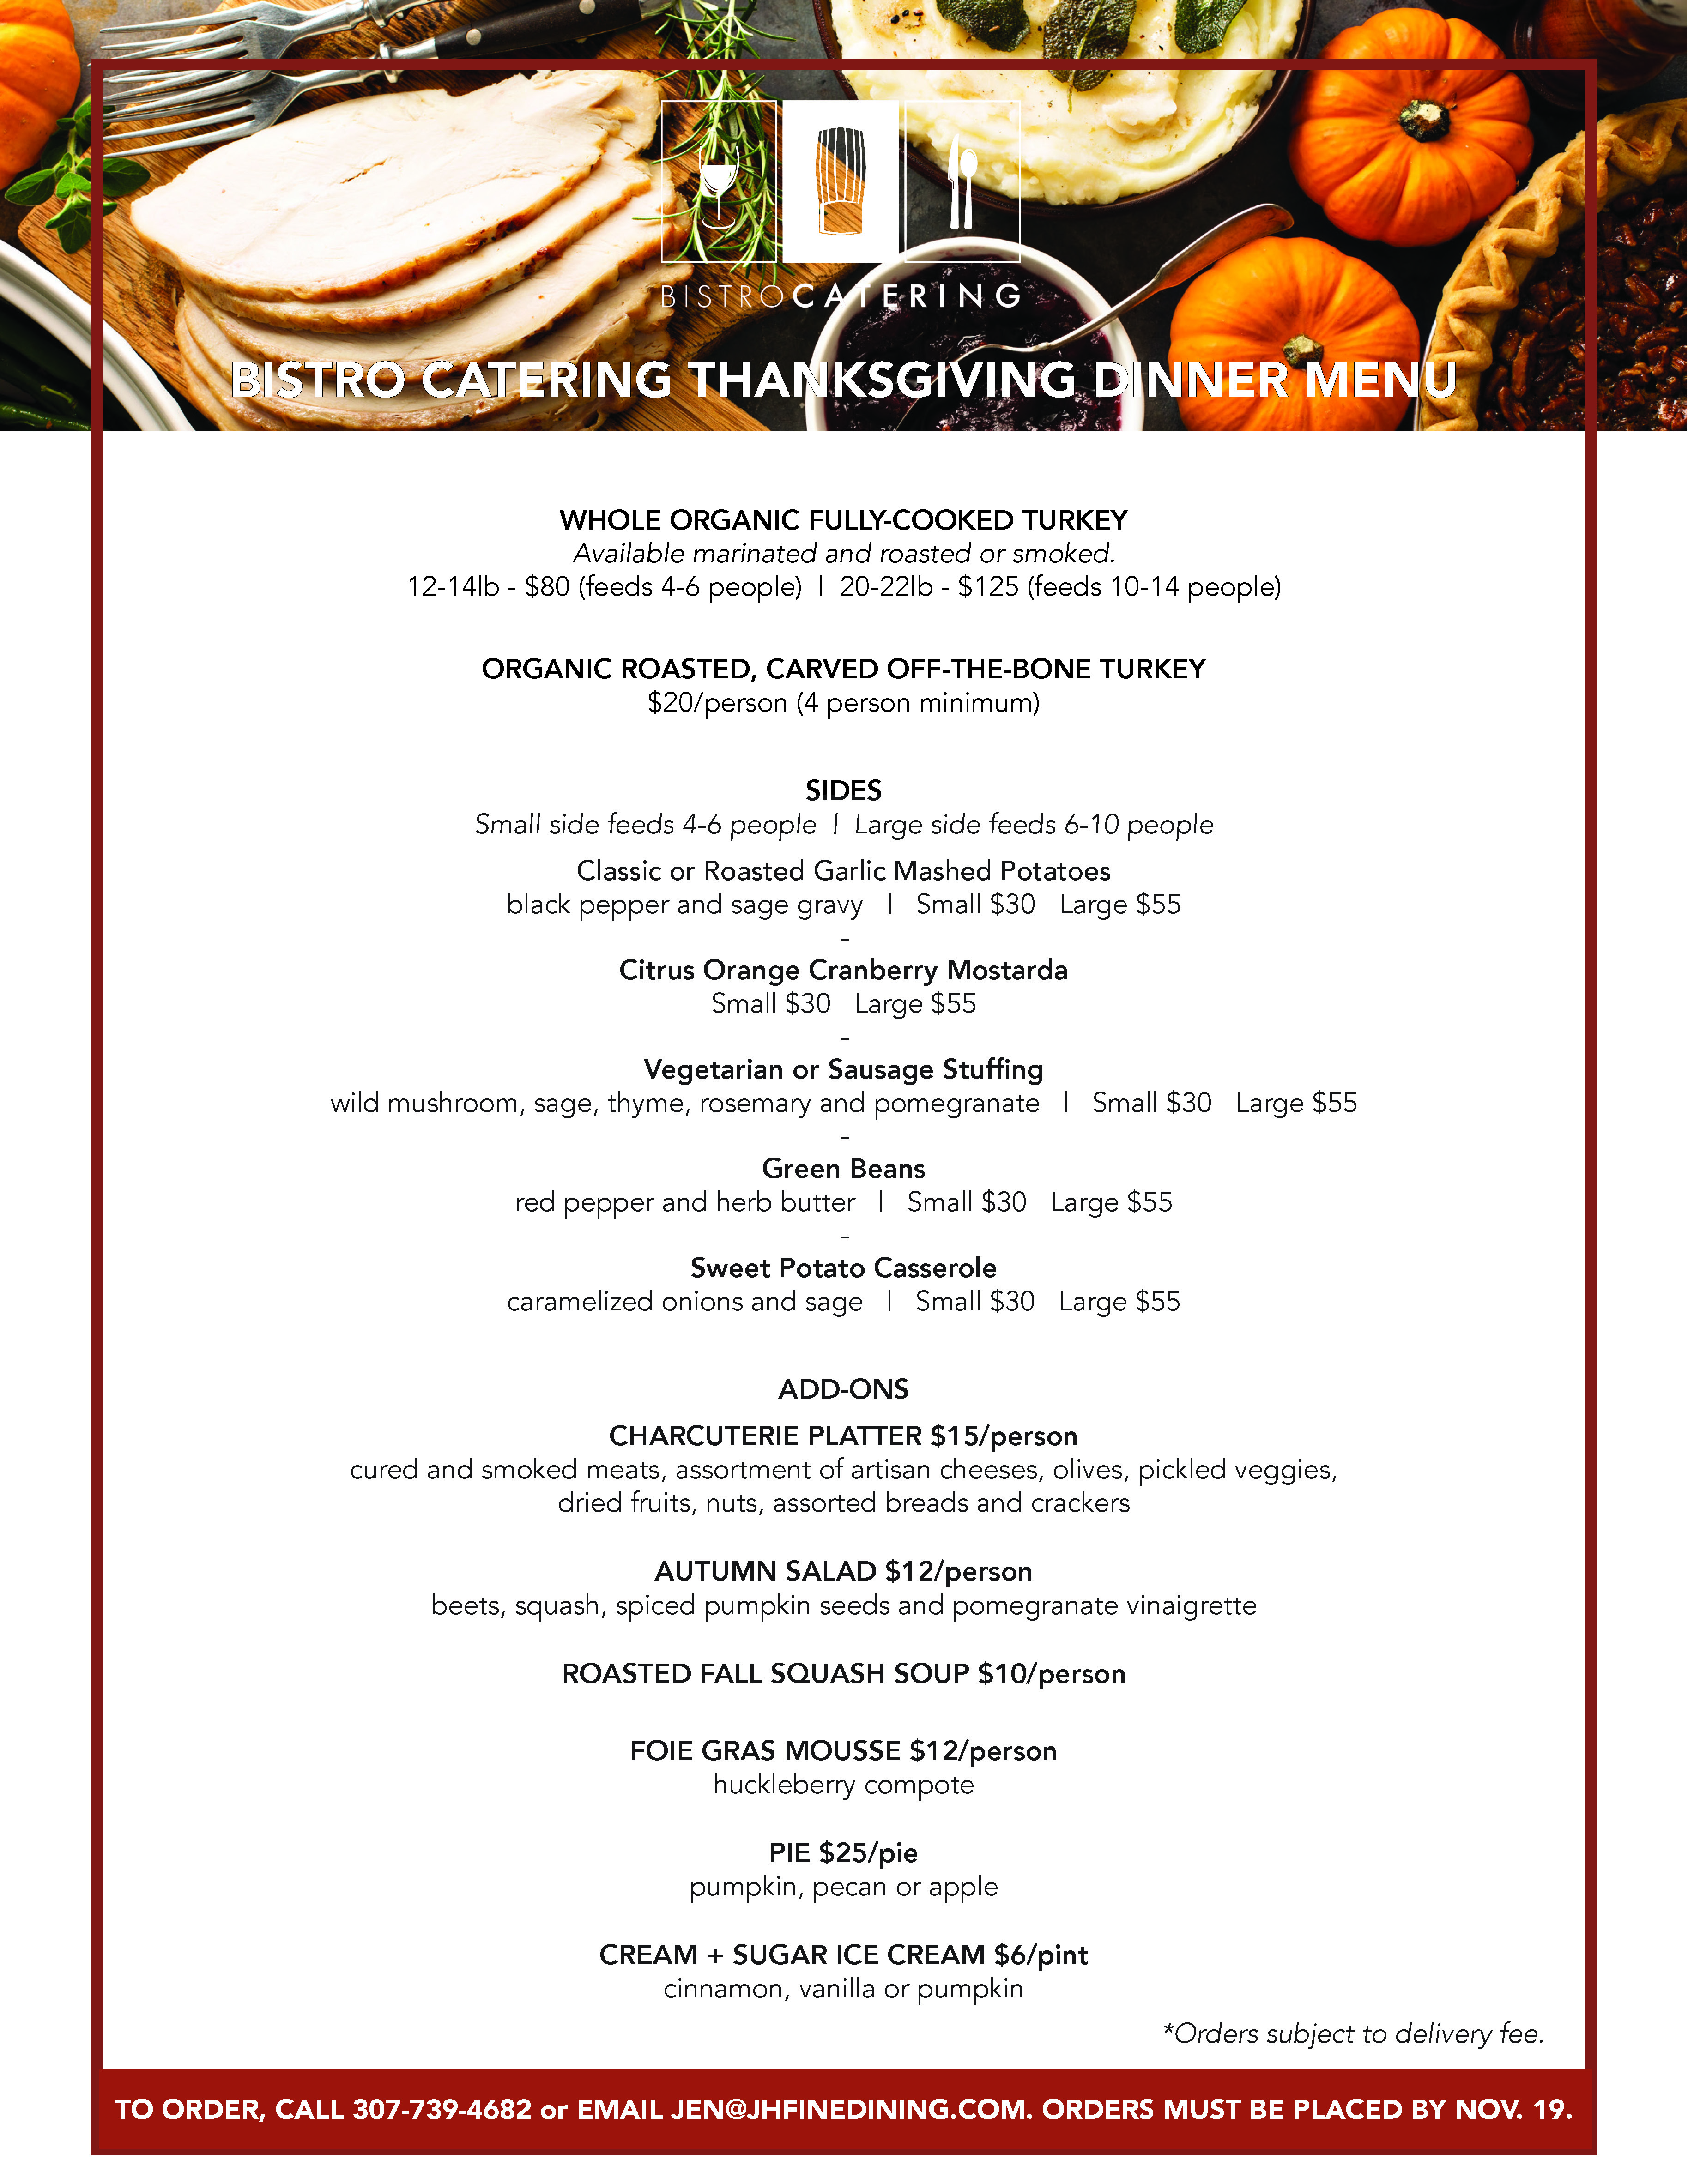 Bistro Catering Thanksgiving 2021 Catering Menu